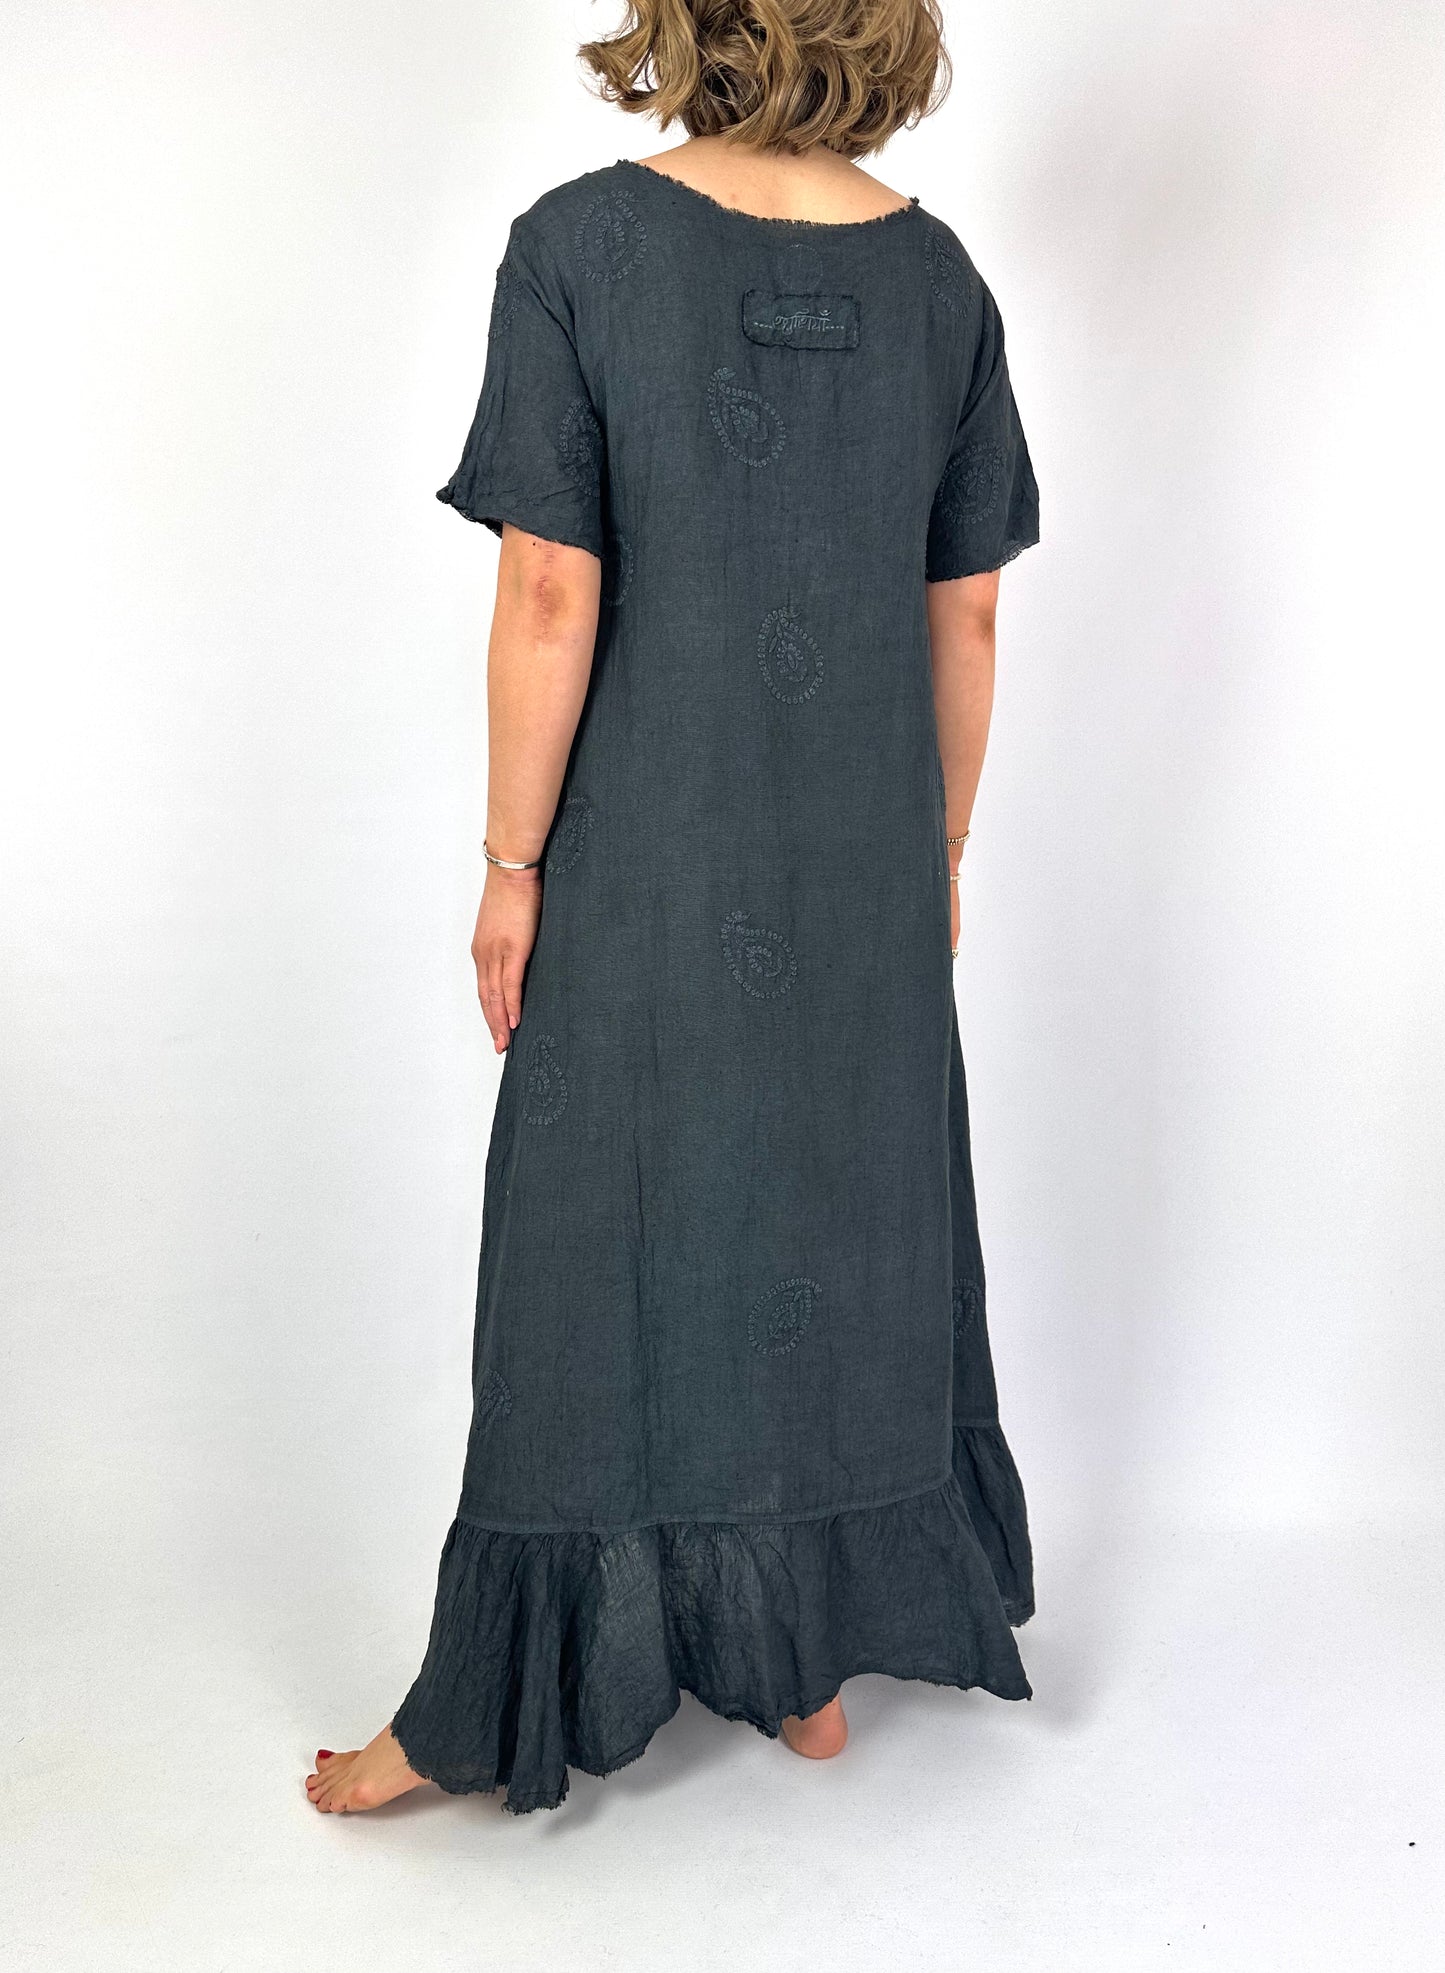 Agencies TurQuoise Paola Dress Charcoal